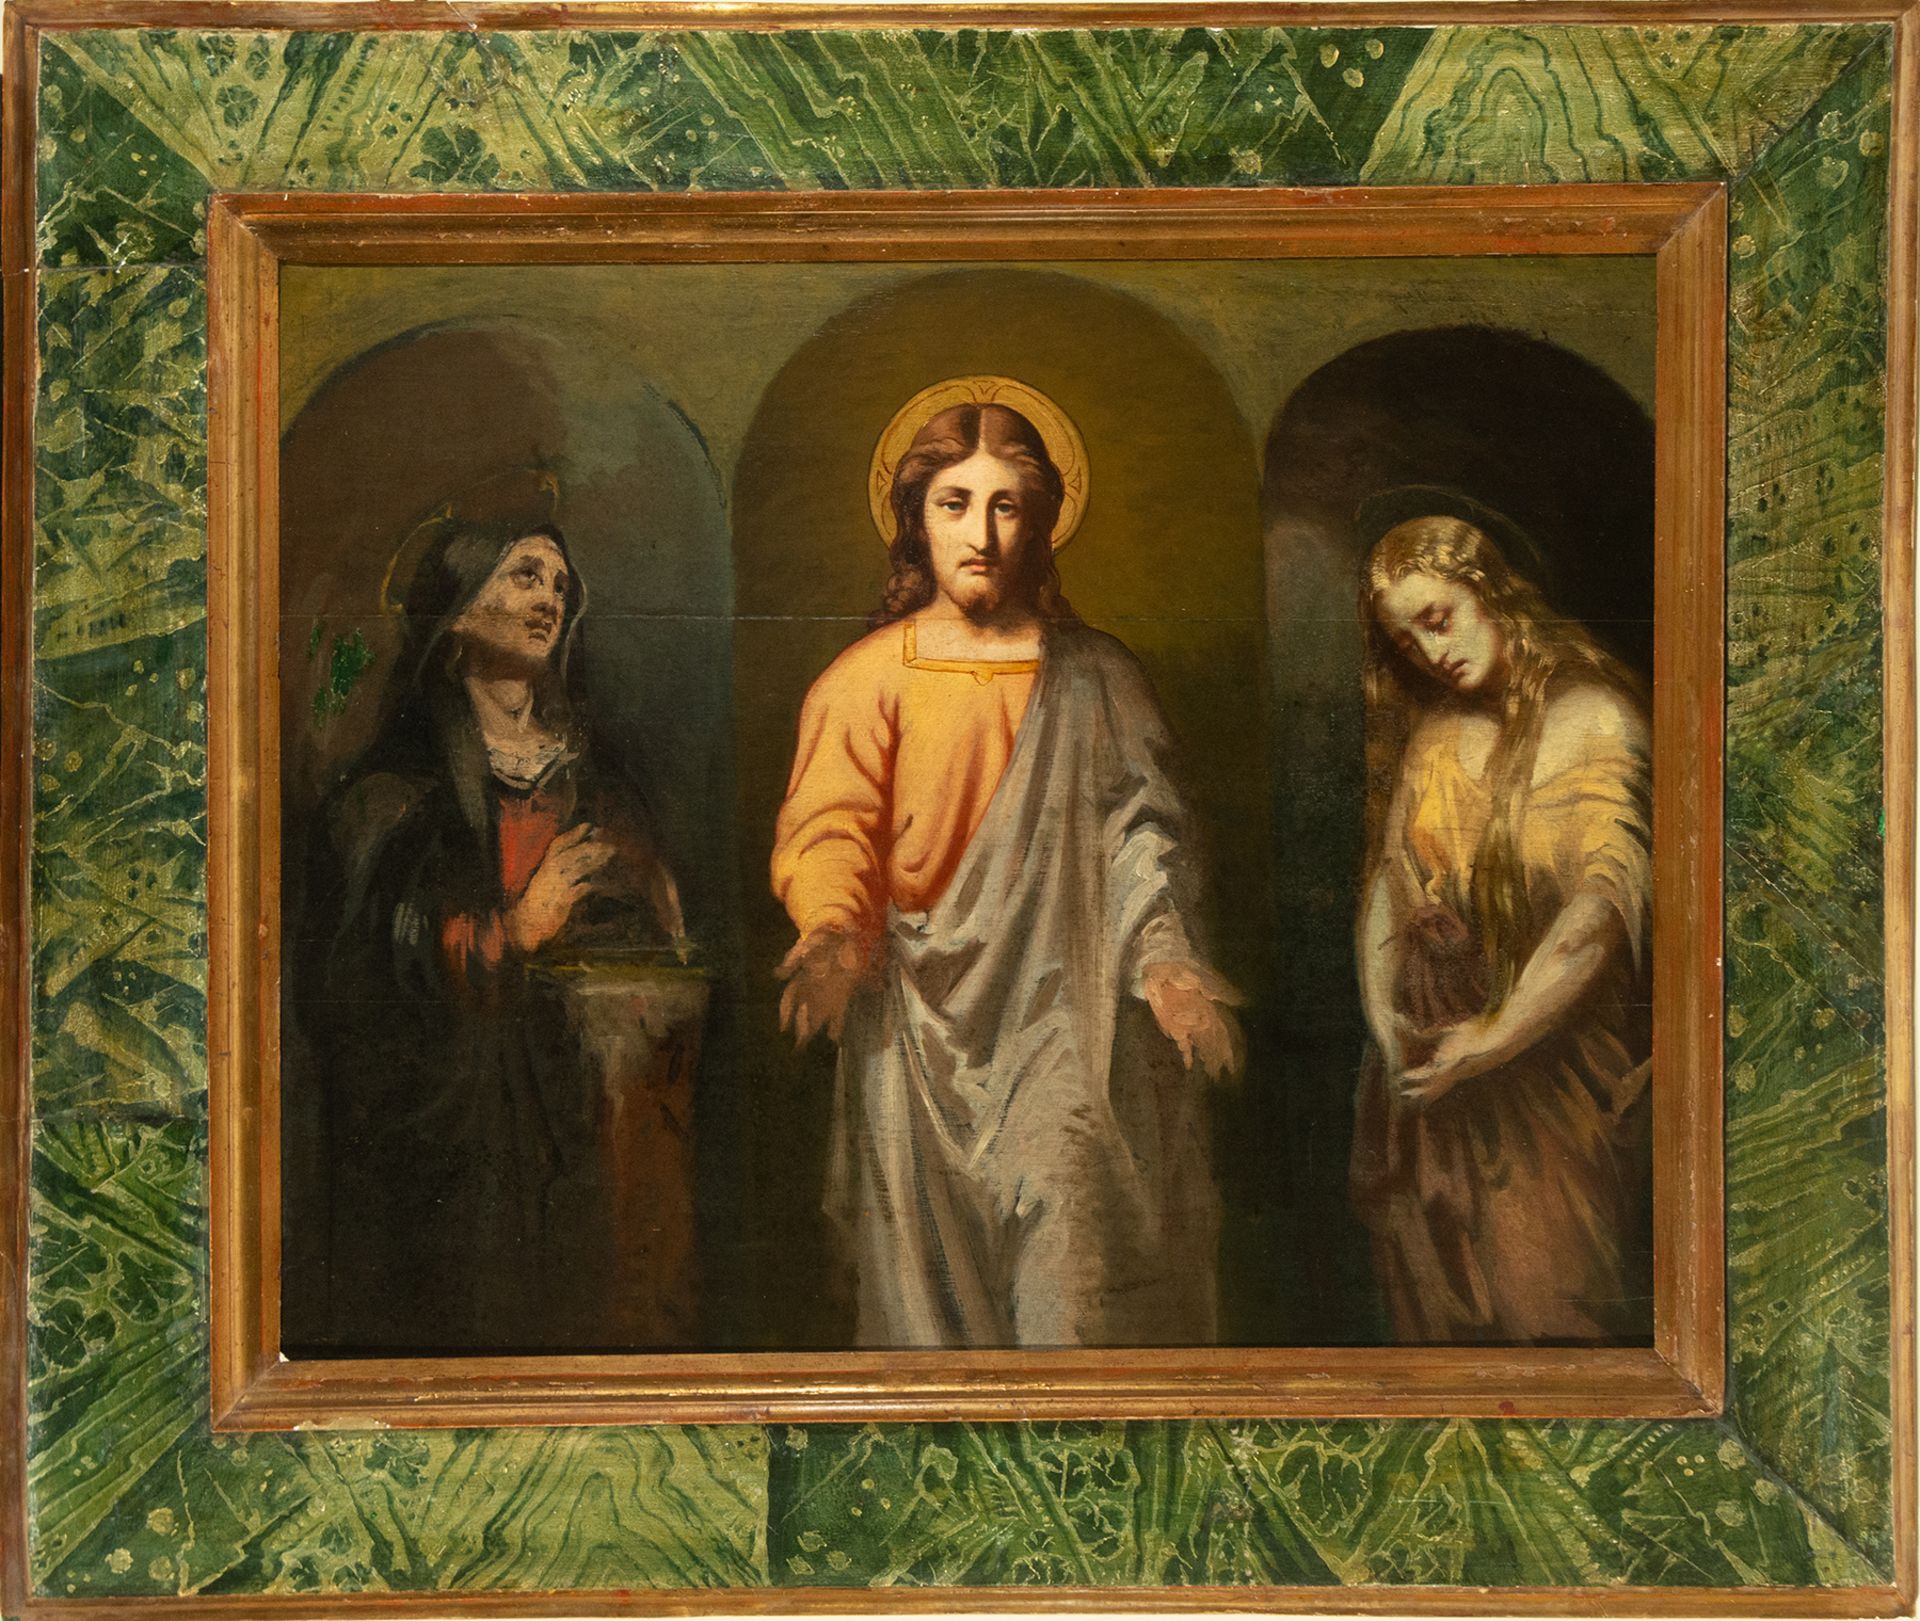 Pre-Raphaelite school, 19th century, Christ with Mary and Magdalene